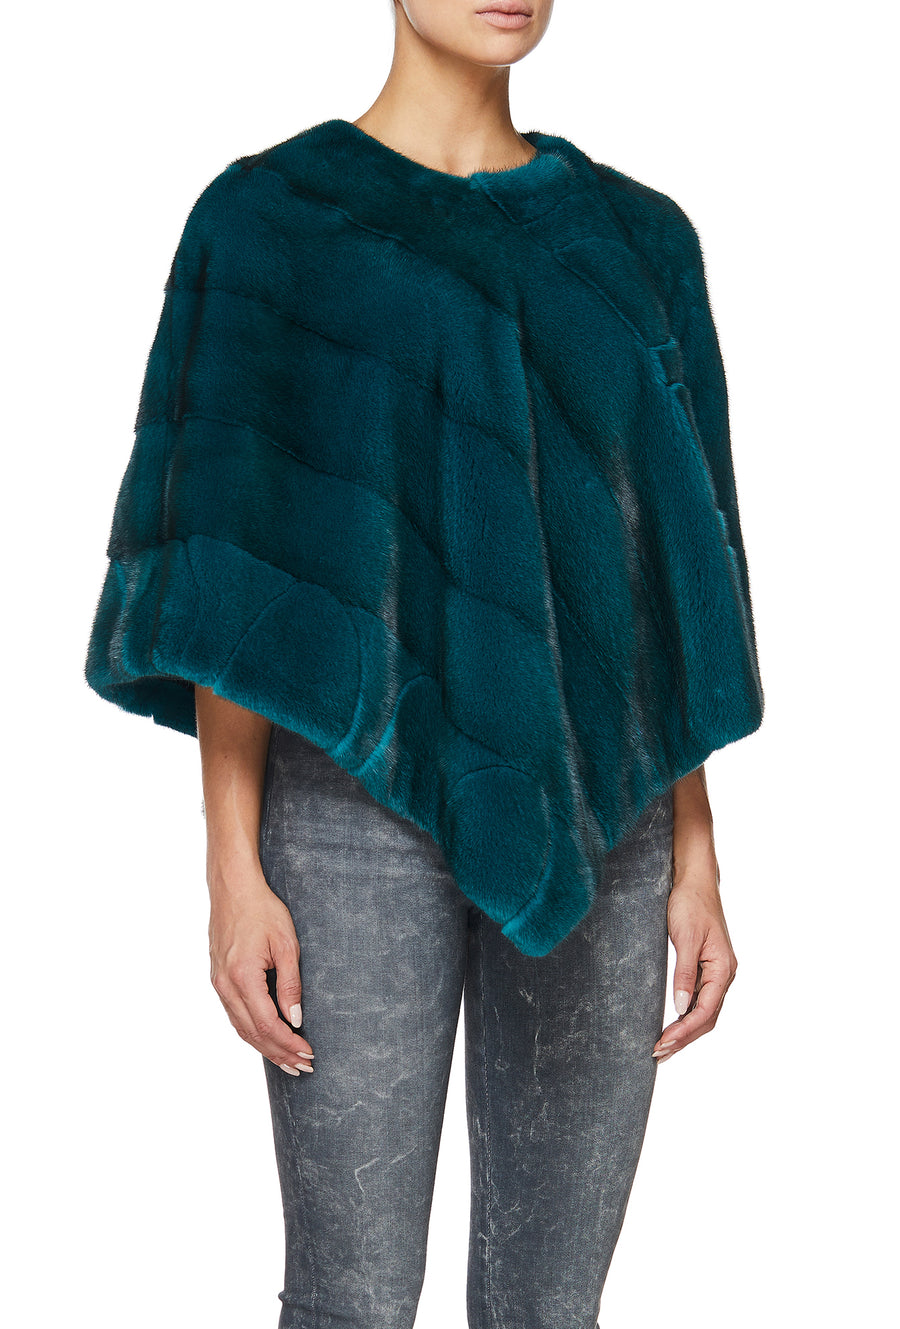 BLISS PONCHO IN TEAL